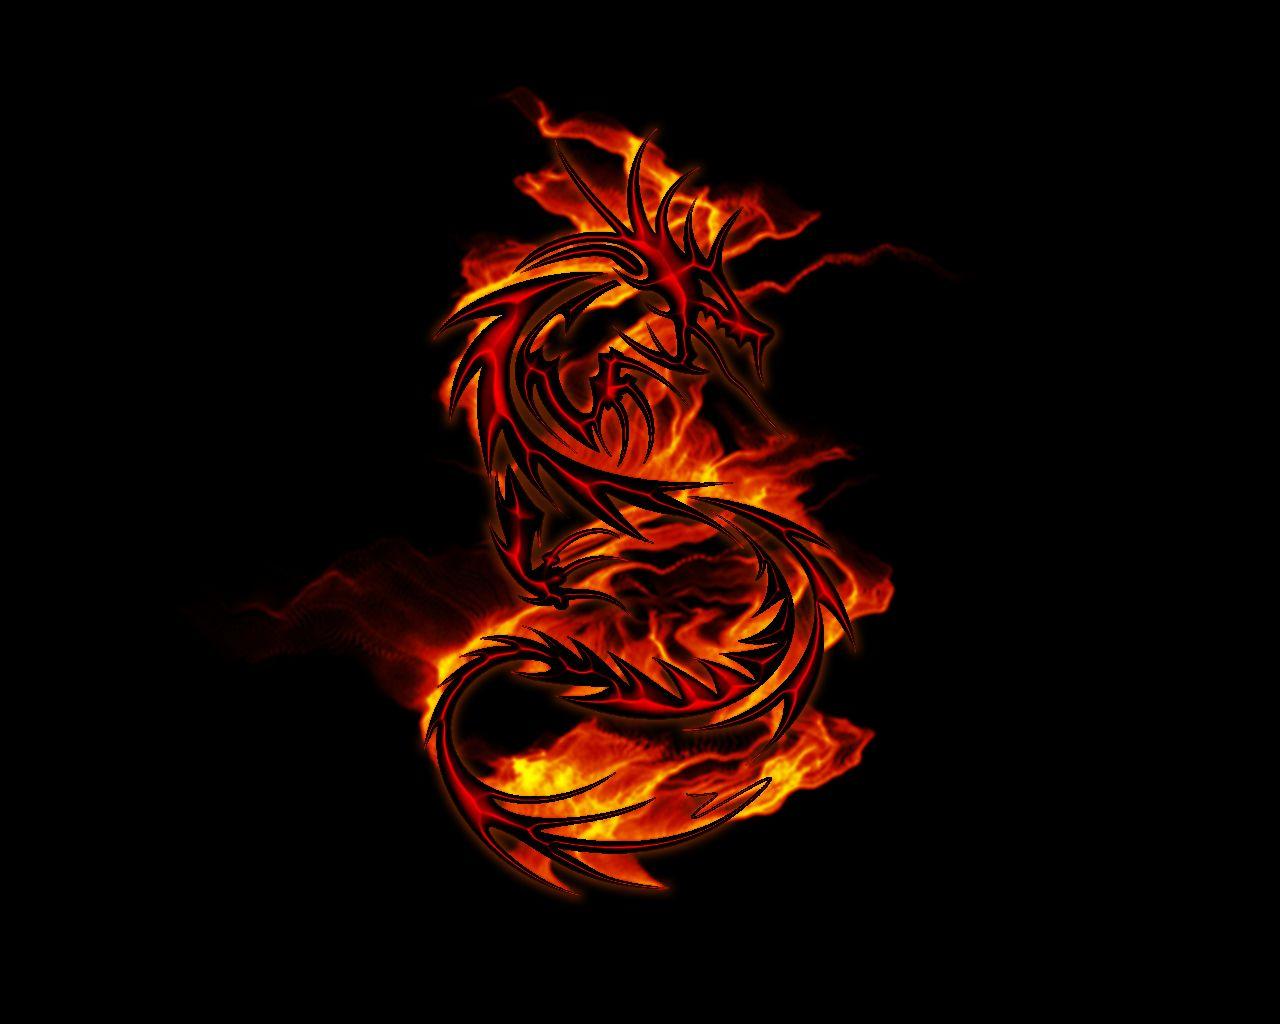 Blue Fire Dragon Wallpapers